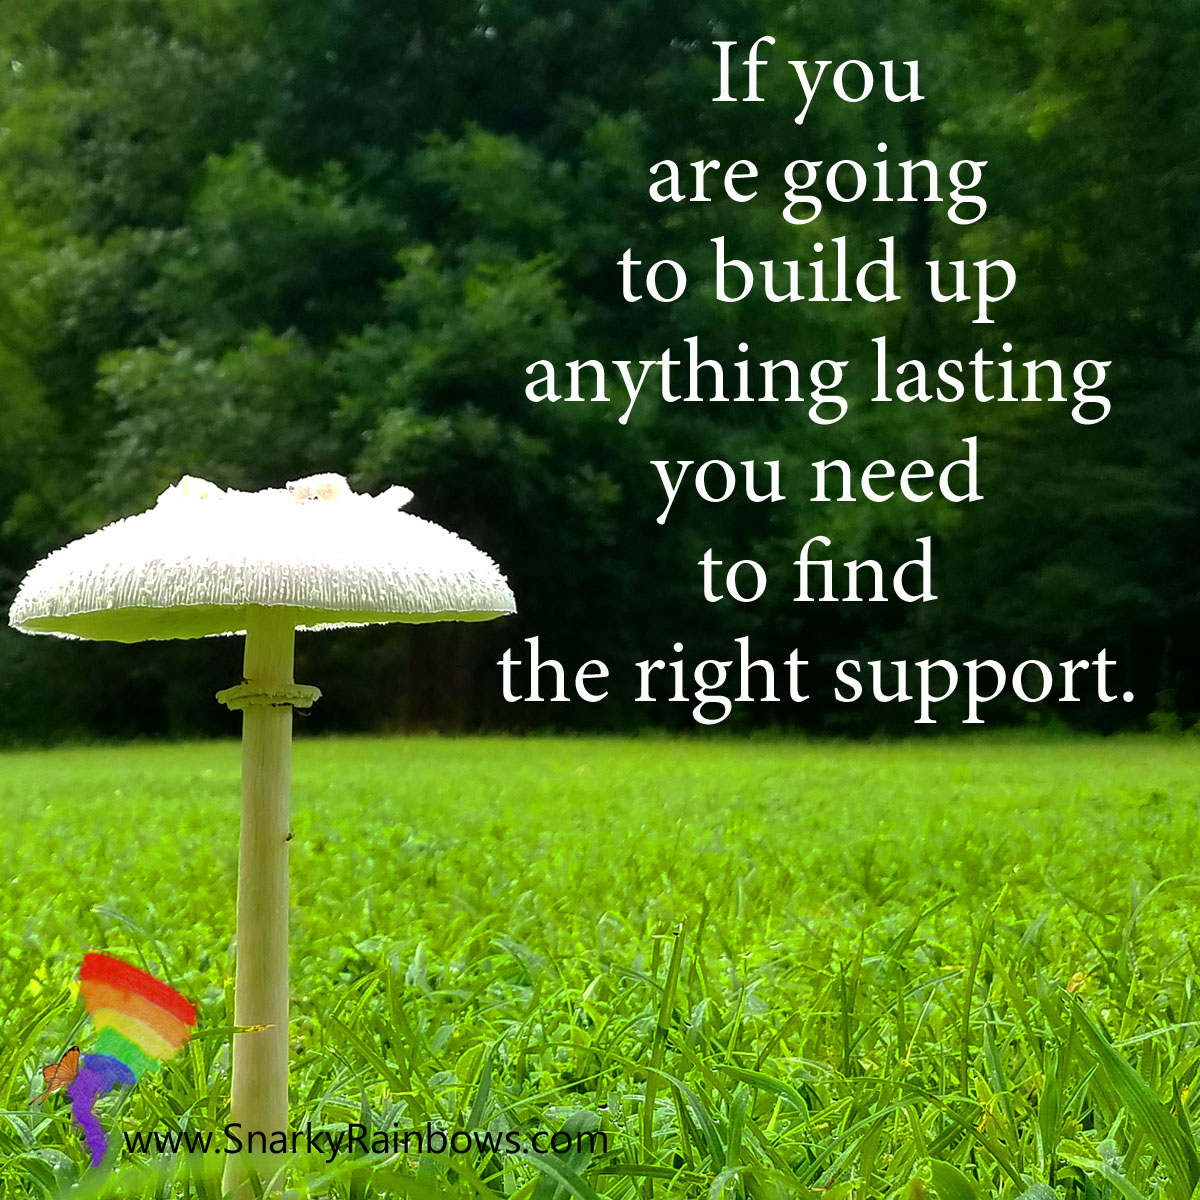 #Quoteoftheday - finding support